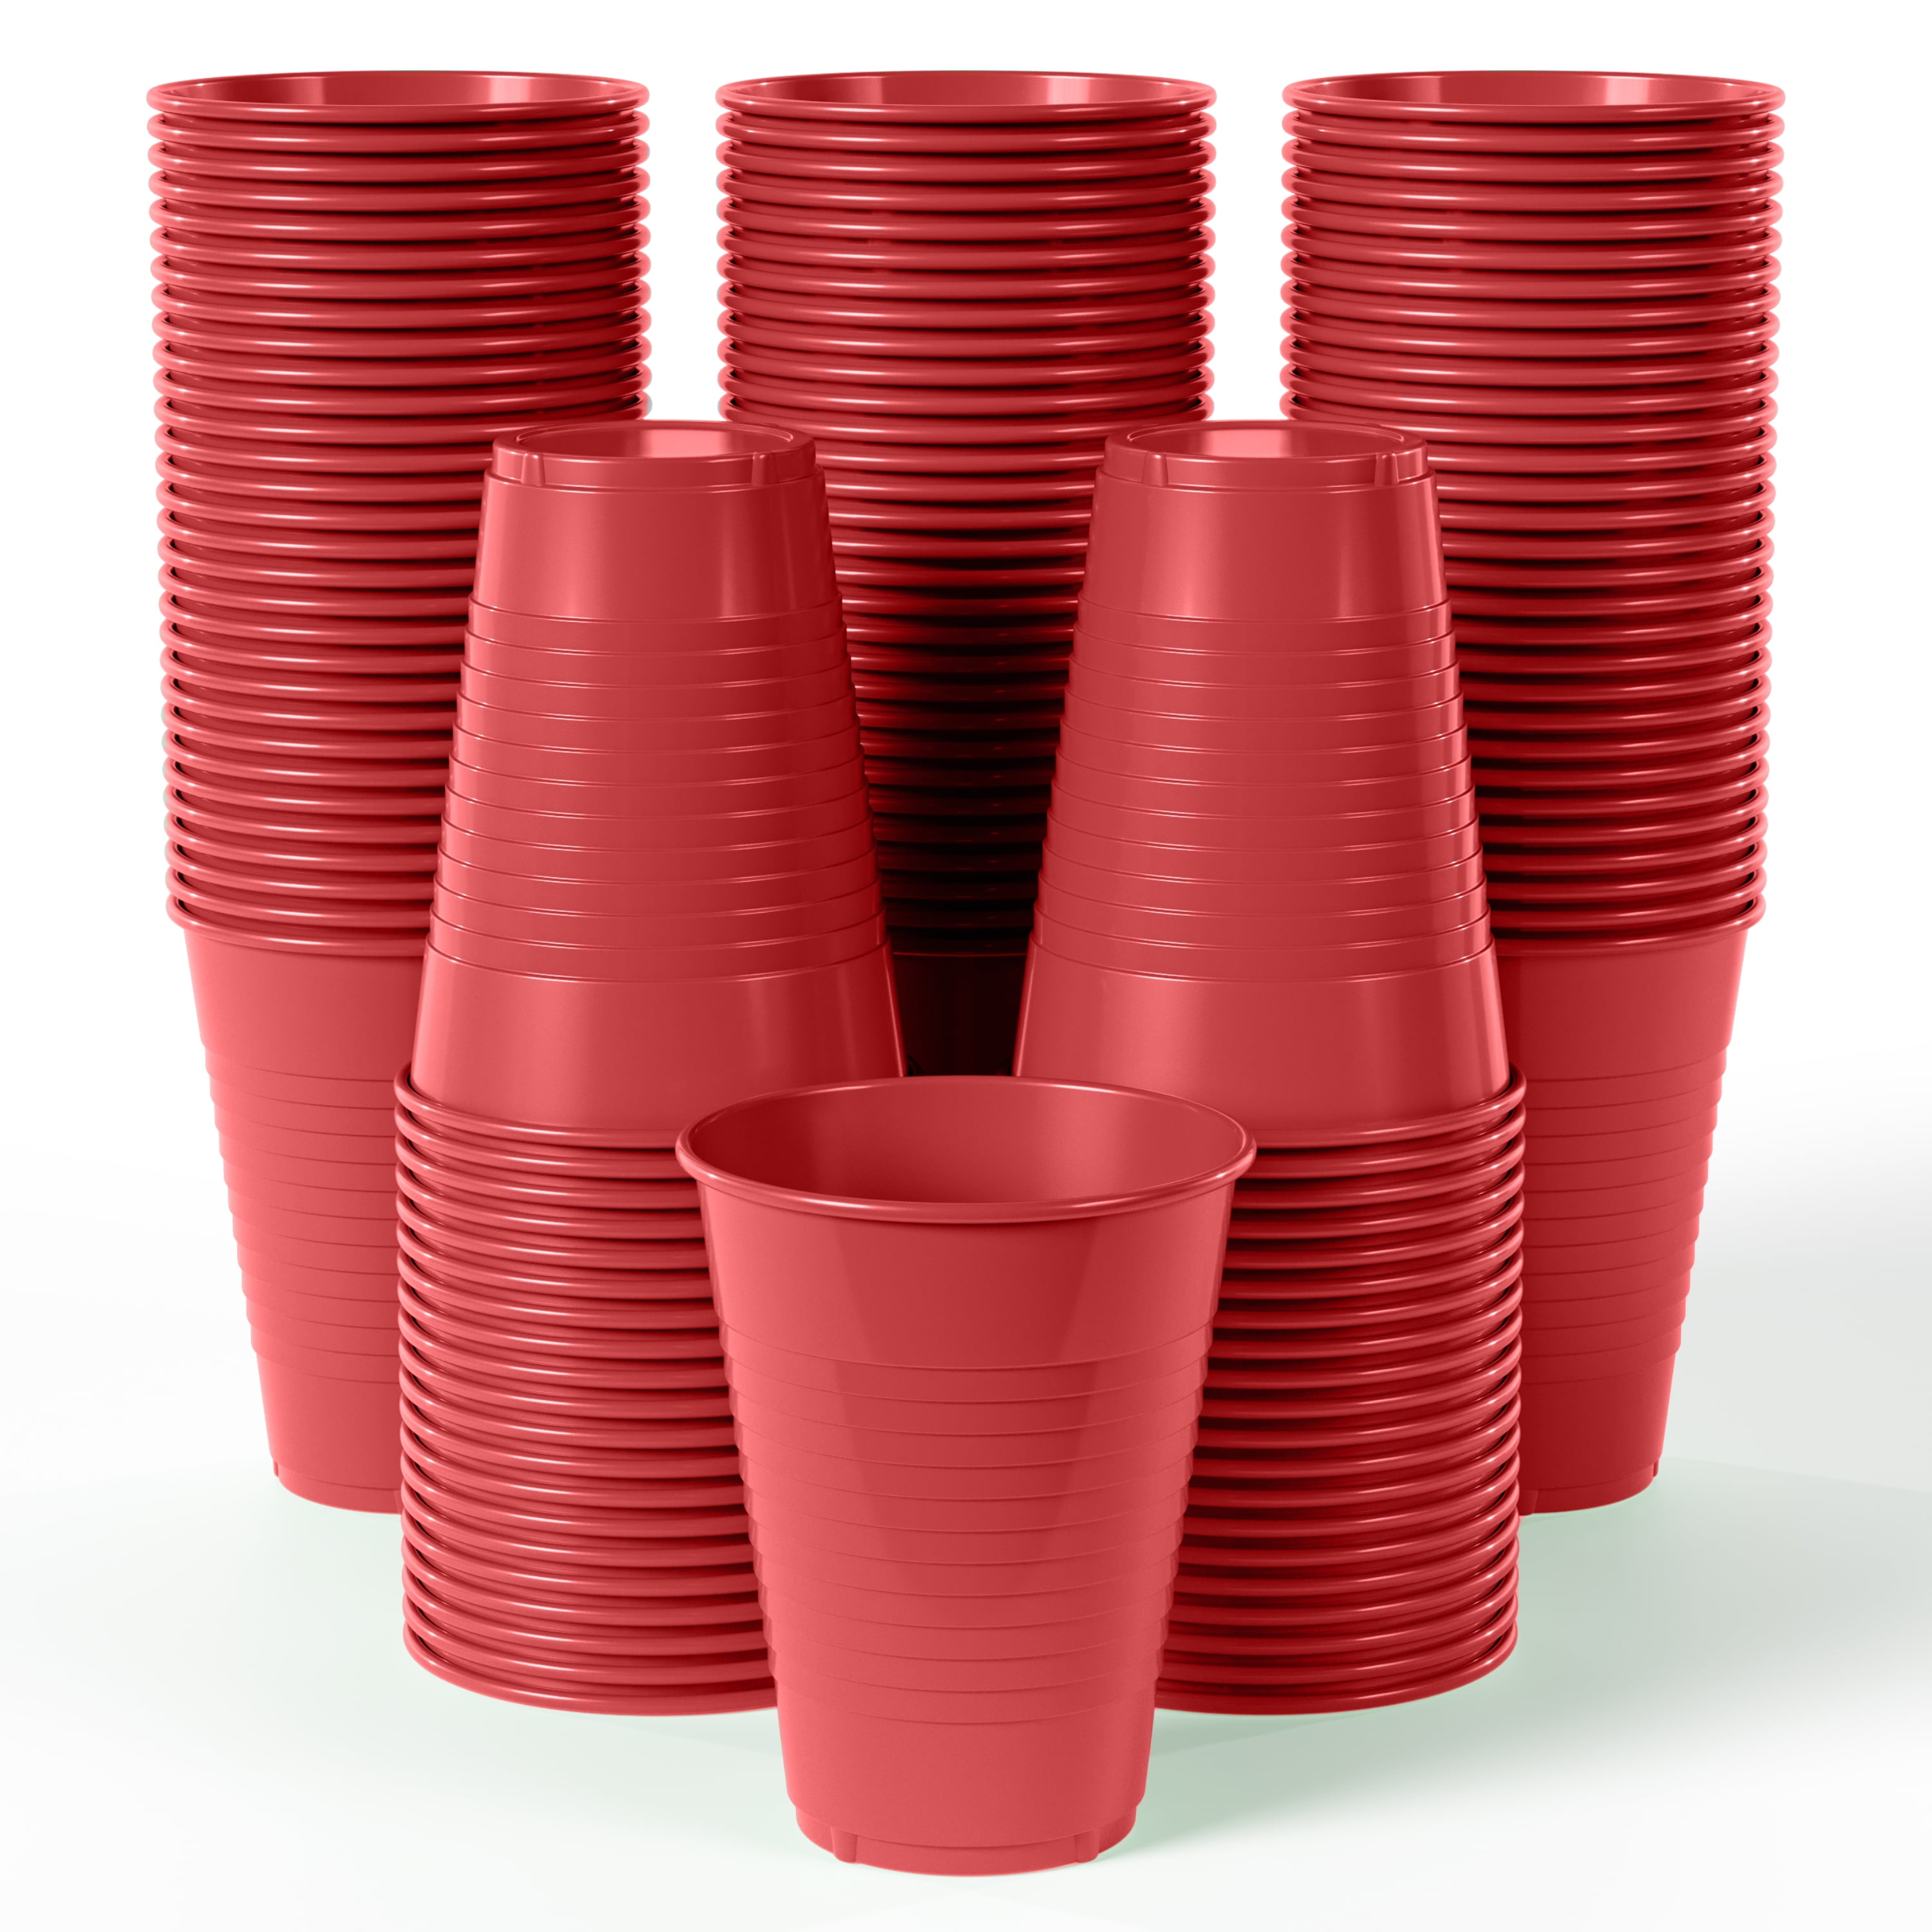 Solo 24 Oz. Red Party Cups 12 Ct.  Disposable Tableware & Napkins